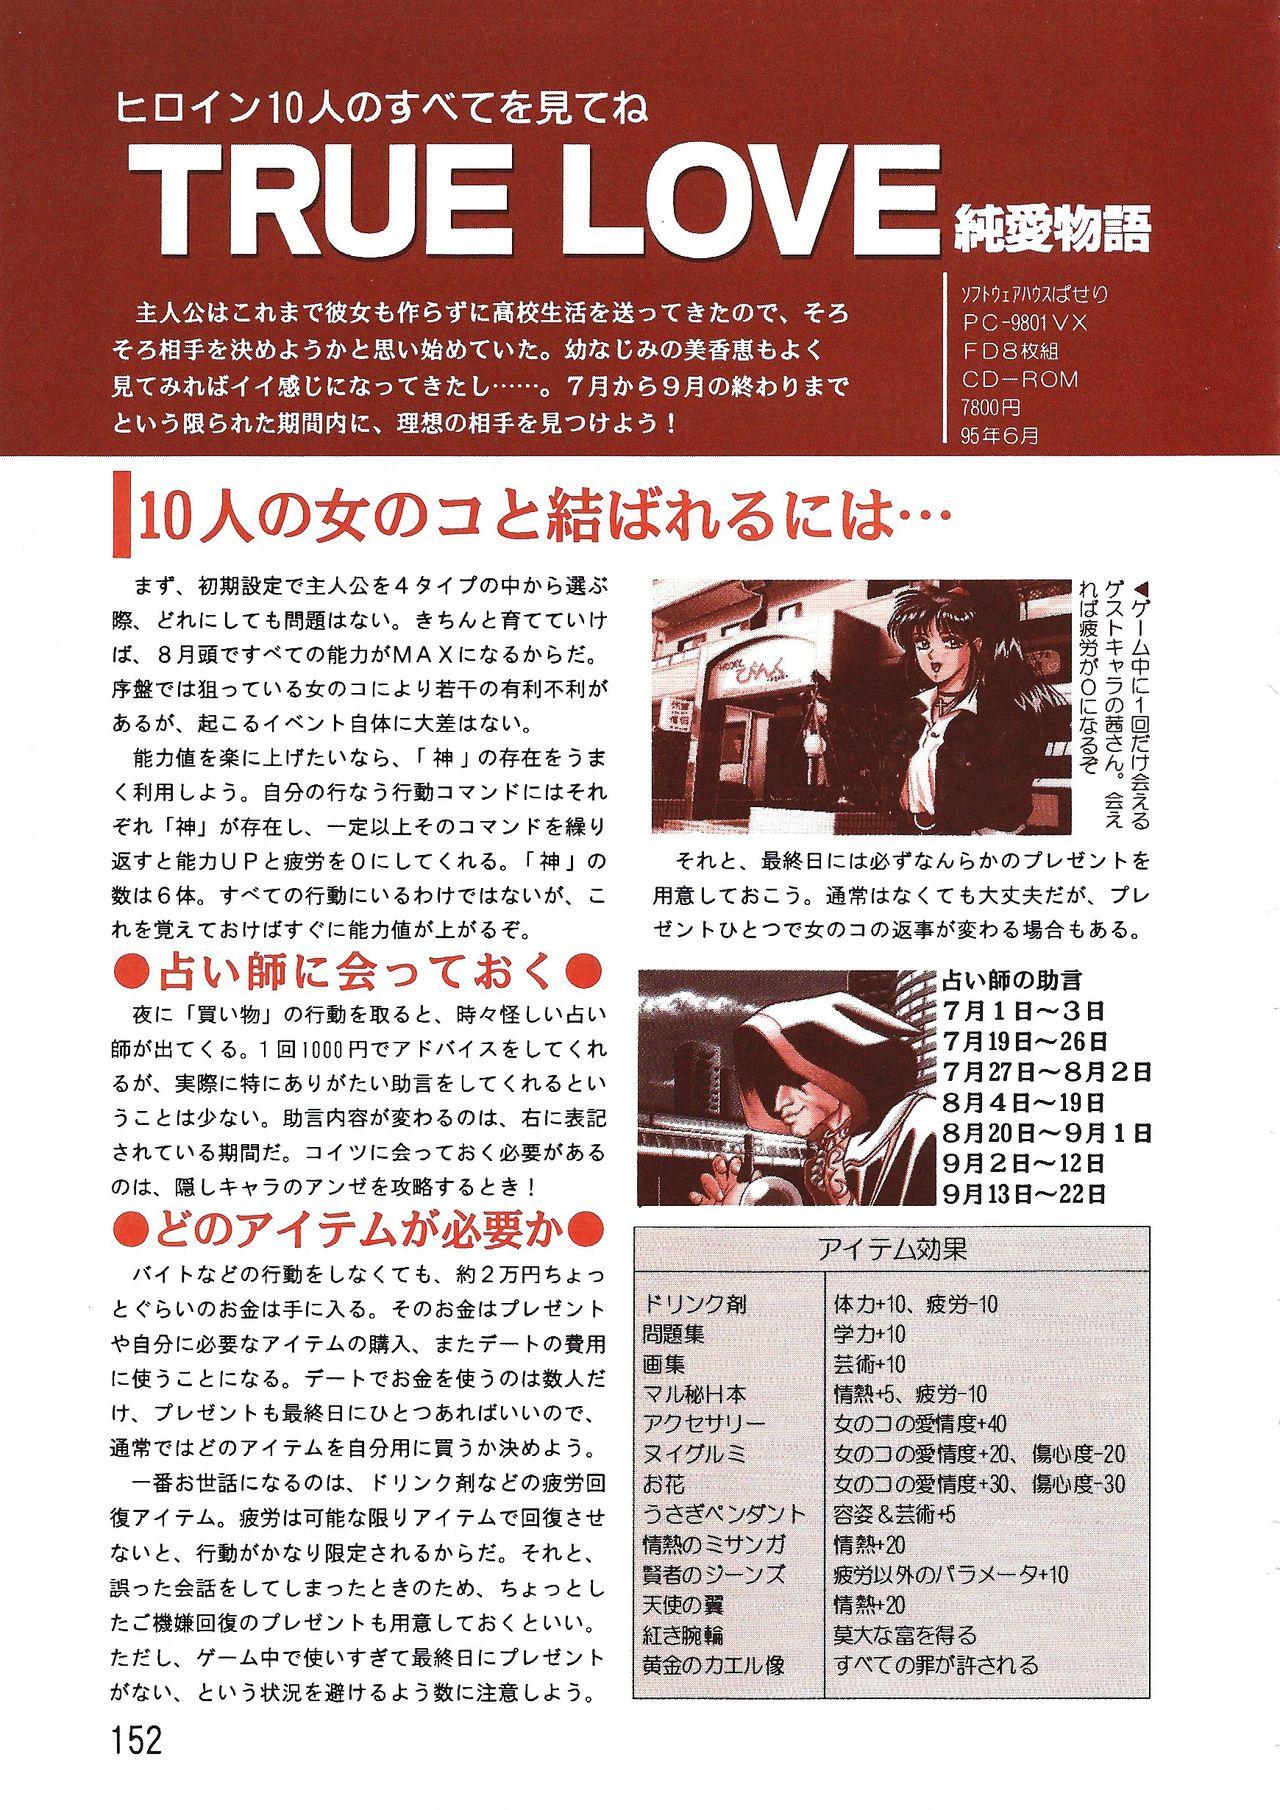 PC Bishoujo Software Strategy Book: Strategy King 2 151